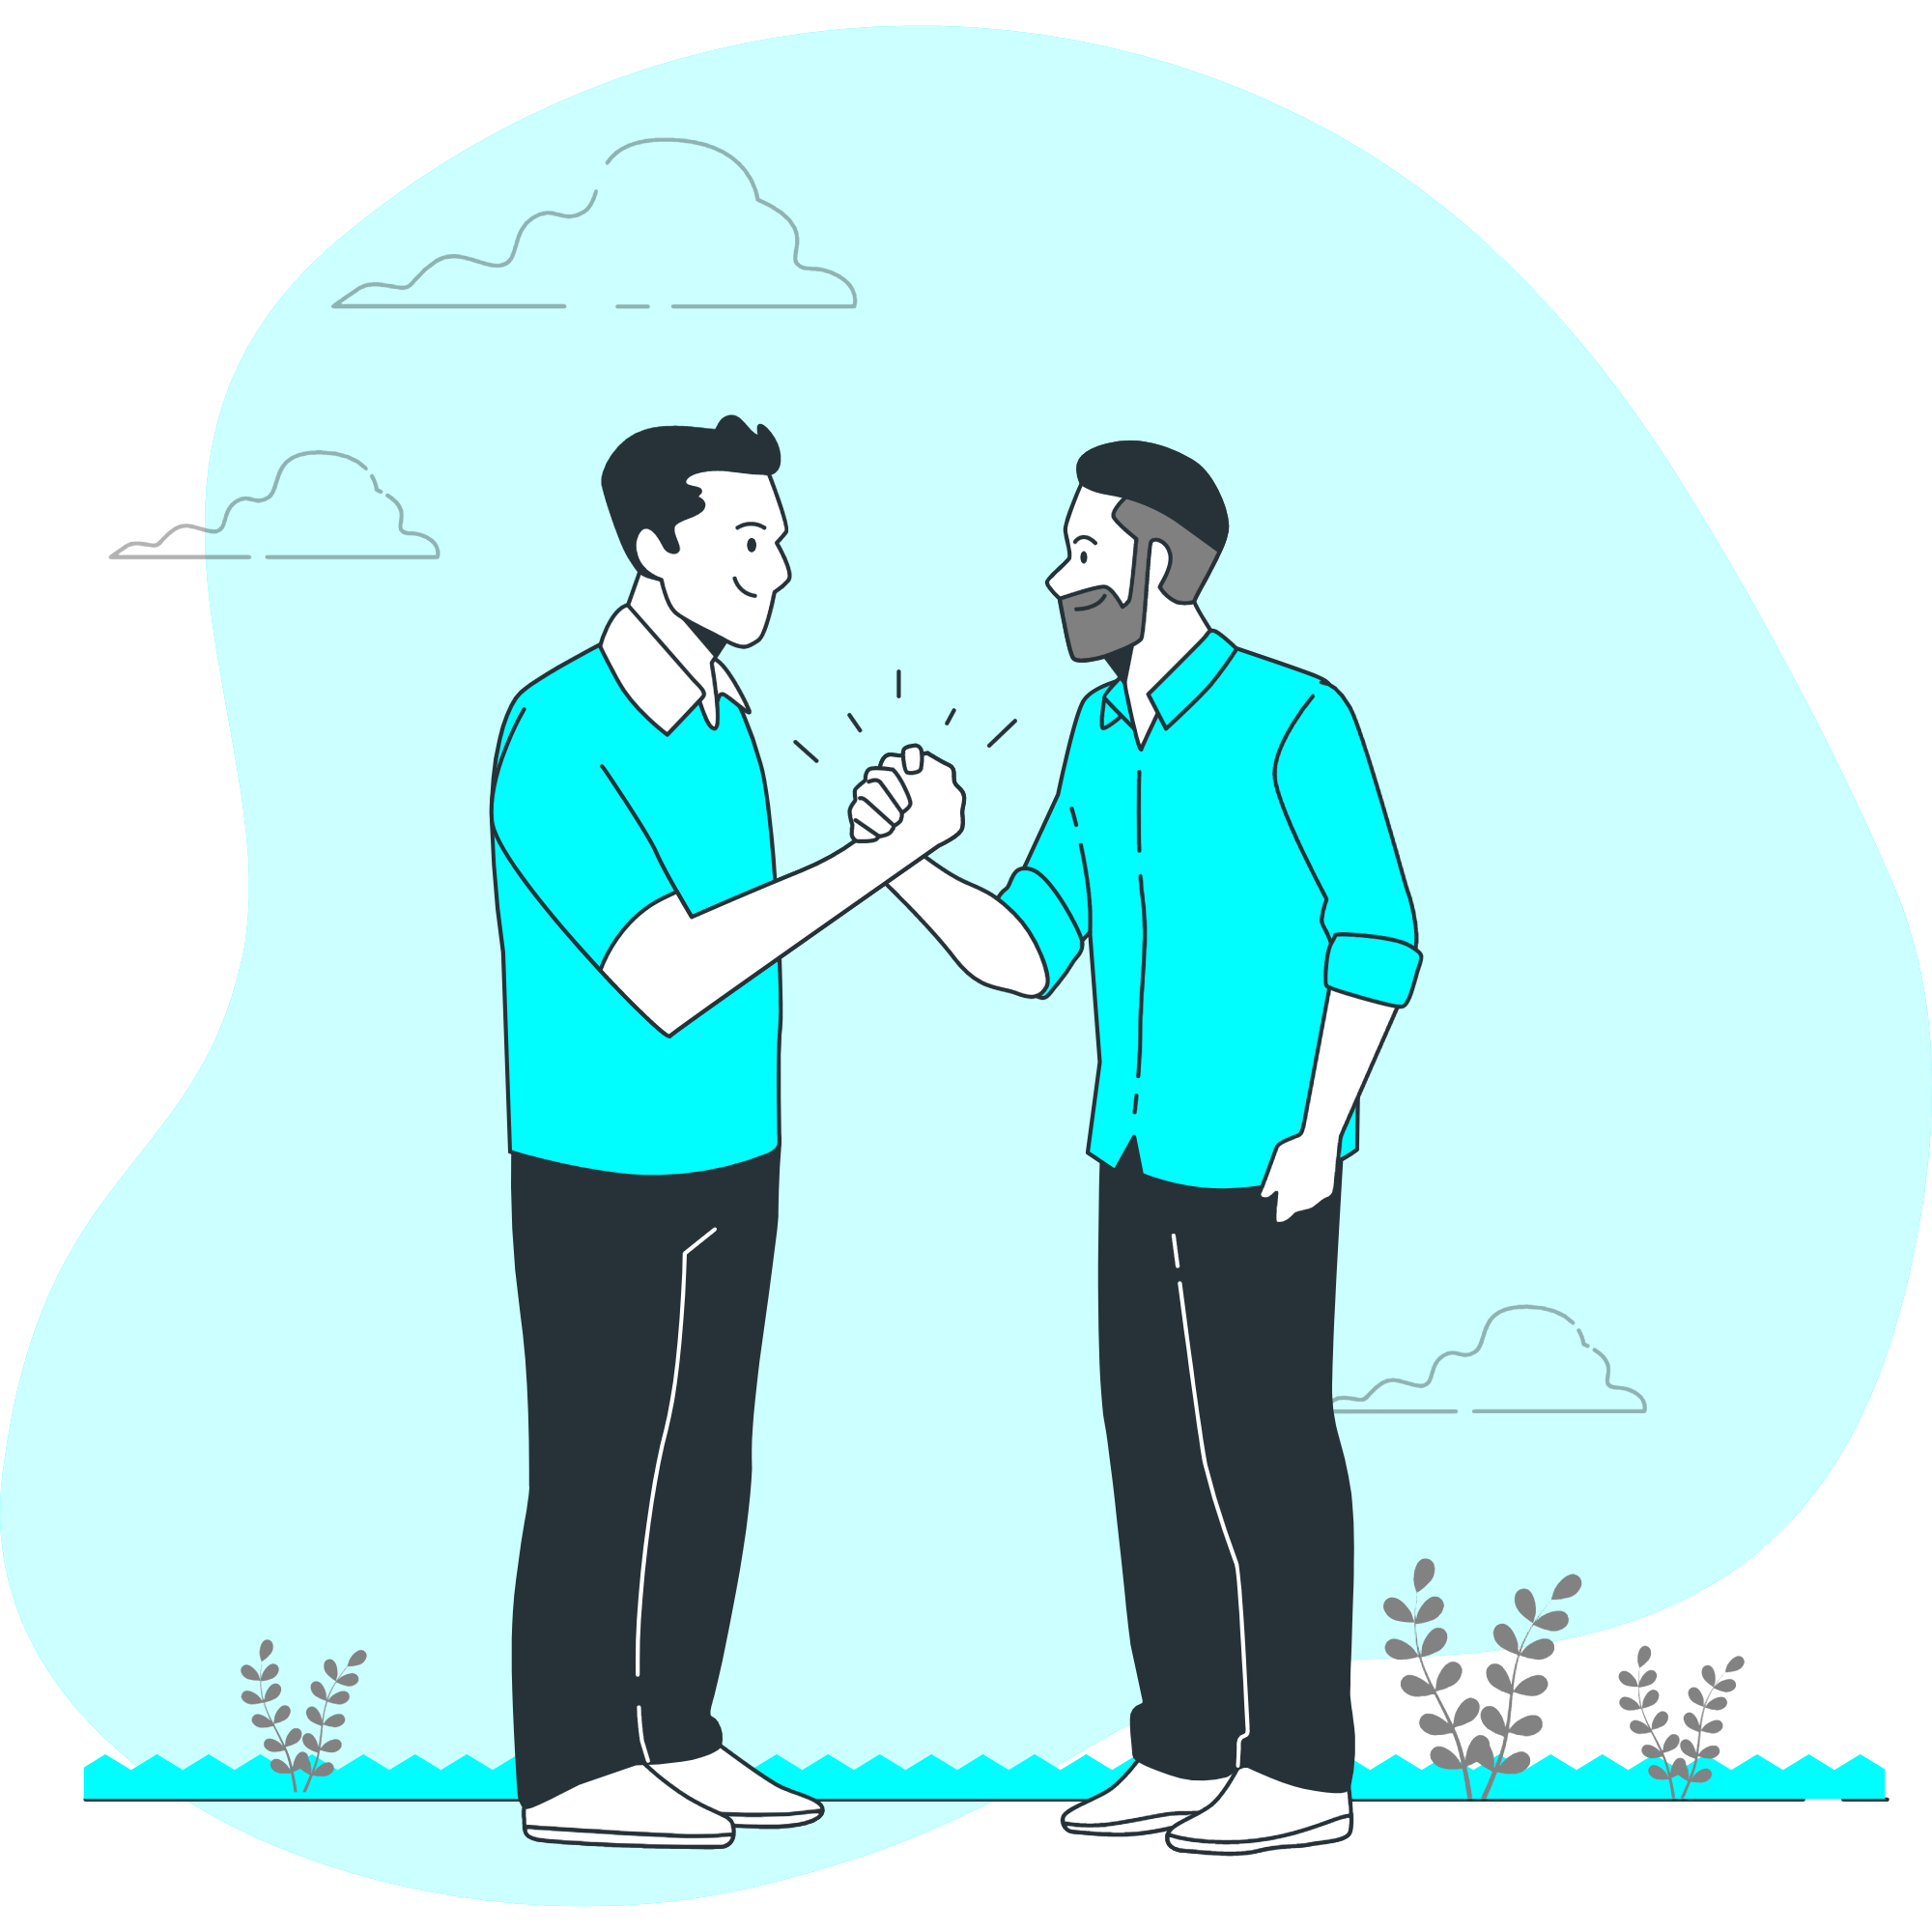 IMage whowing tow individuals shaking hands like a developer and tester as friends